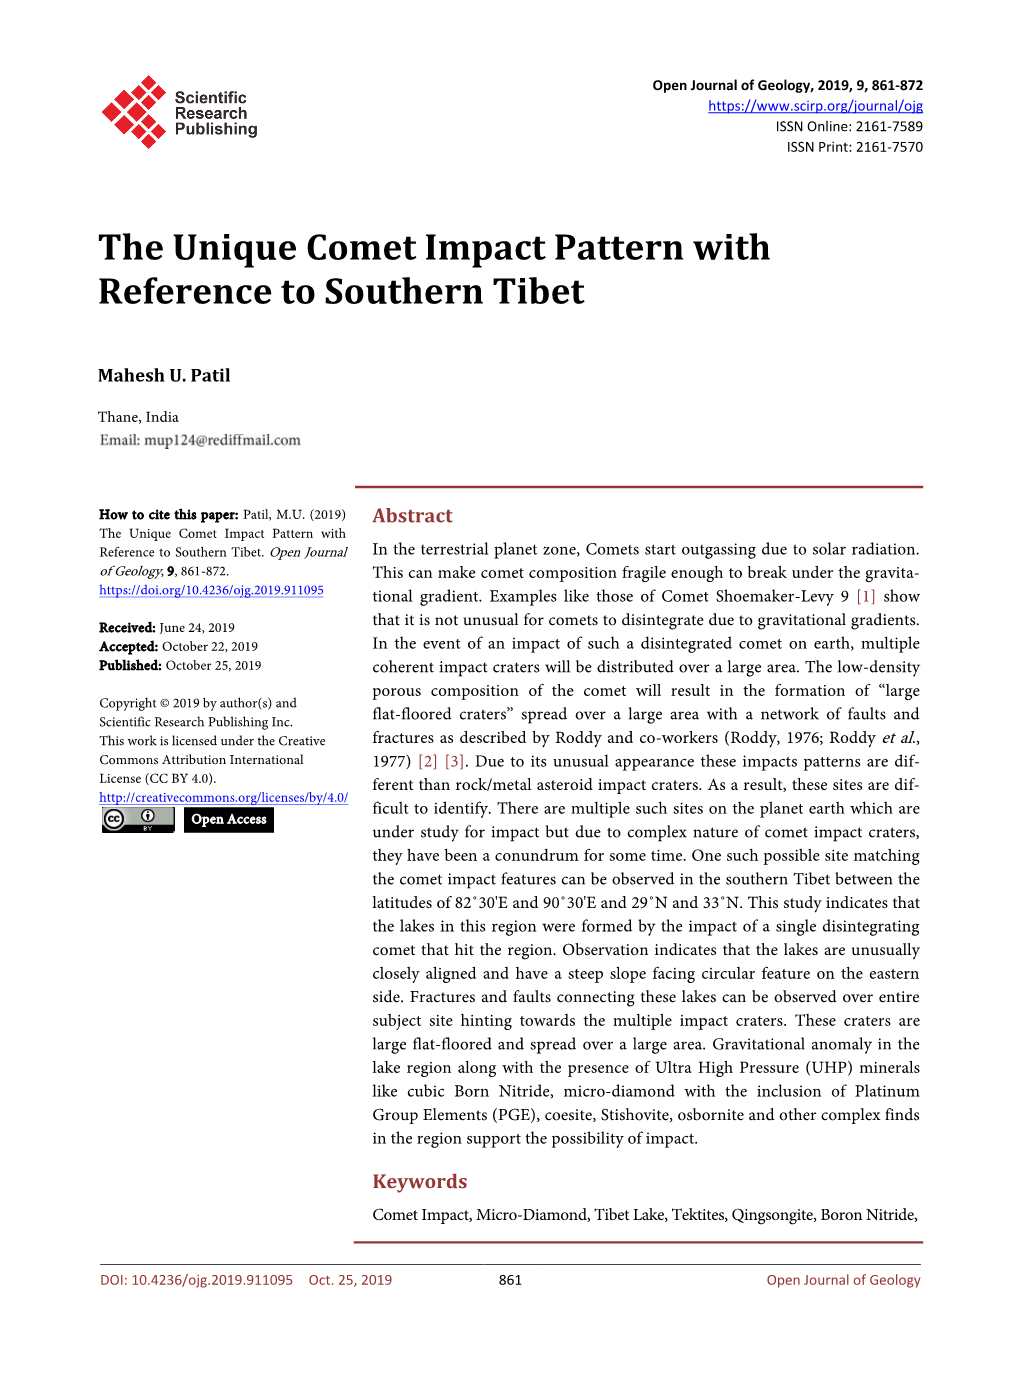 The Unique Comet Impact Pattern with Reference to Southern Tibet